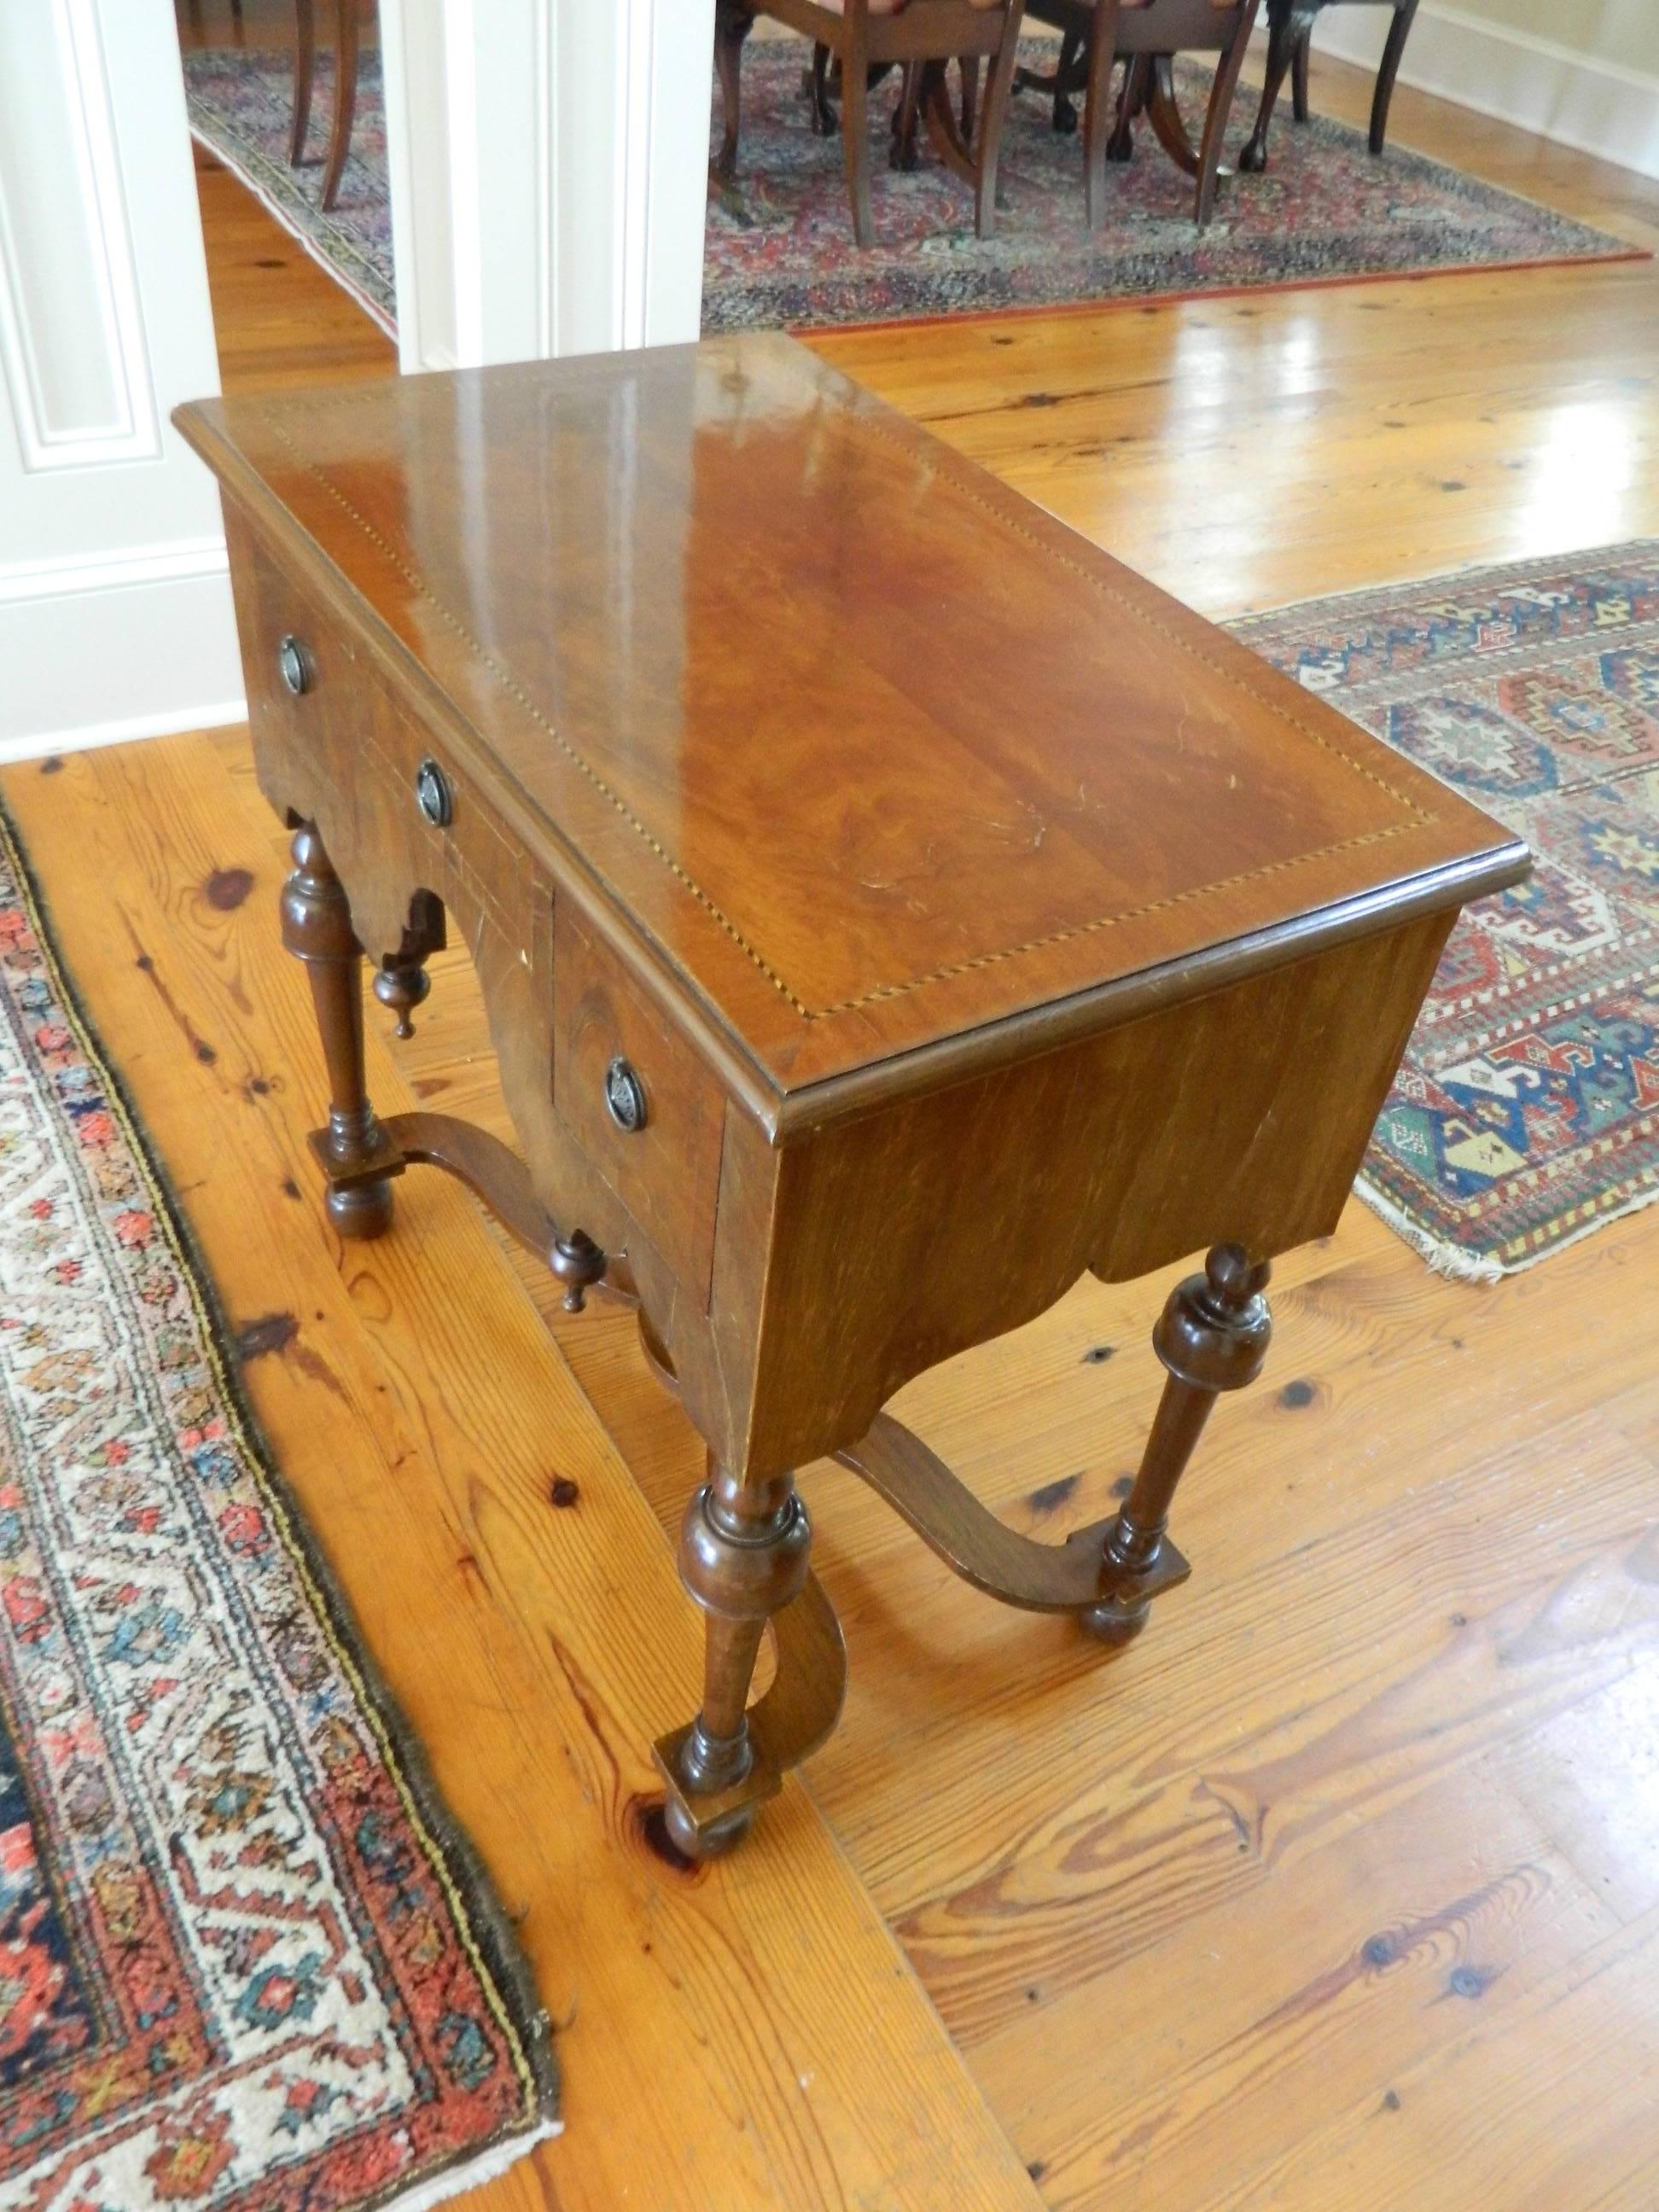 George II Mahogany three-drawer lowboy or dressing table, 19th century. Inverted finials at the skirt of its center knee hole arch. Raised in cup and ball baluster legs connected by a stretcher and bun feet.